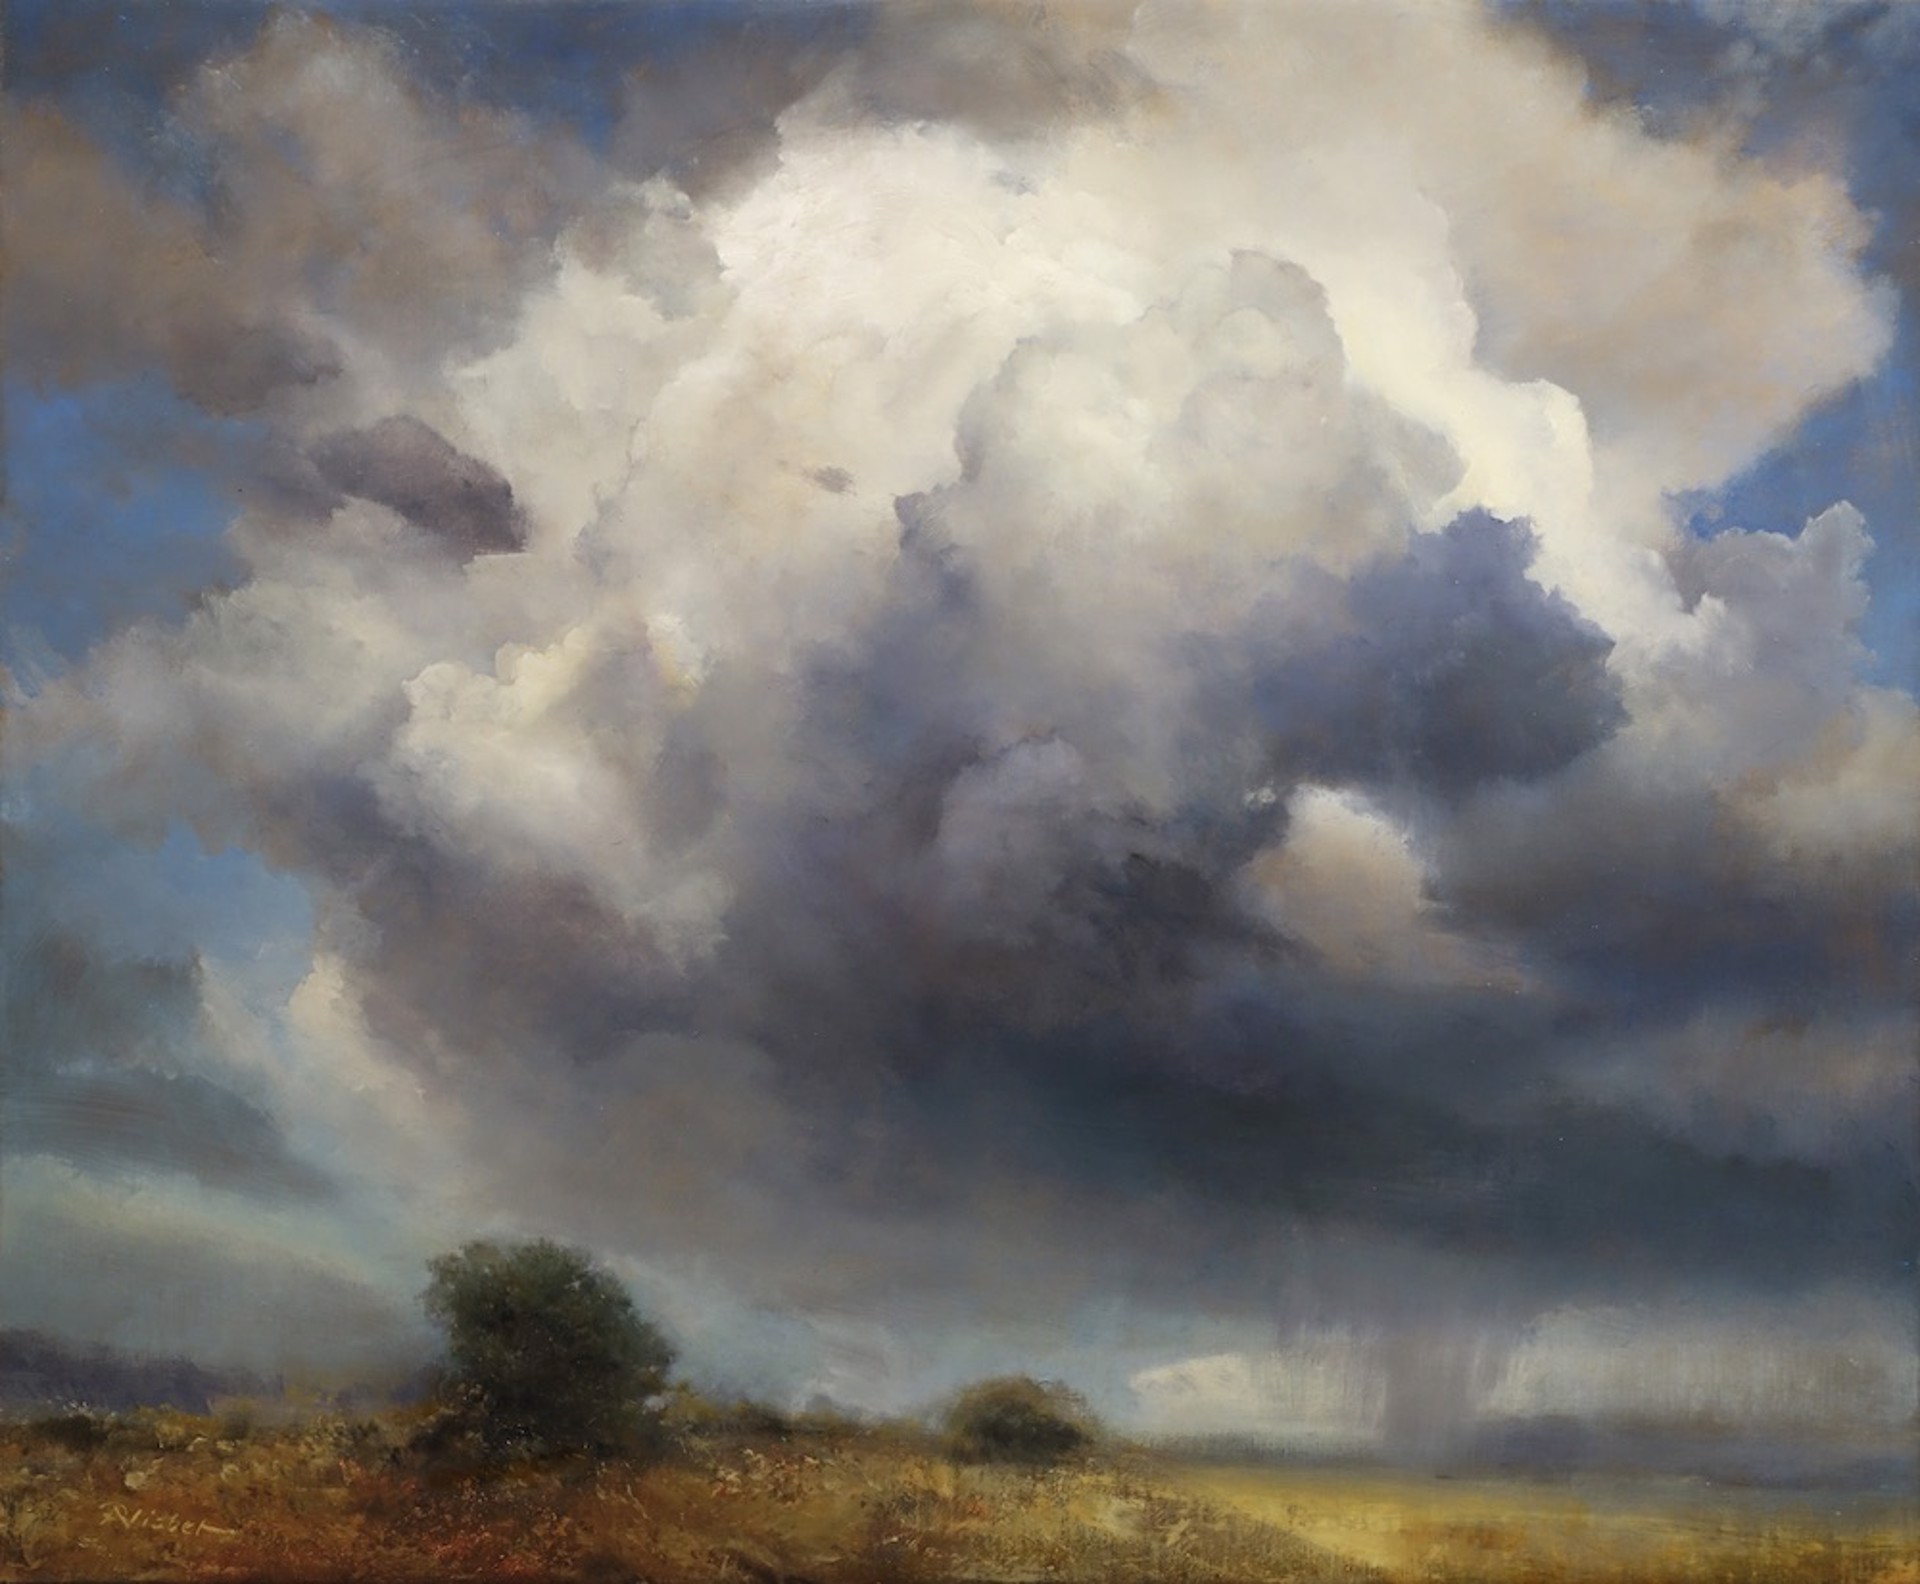 Storm at Pecos by P.A. Nisbet